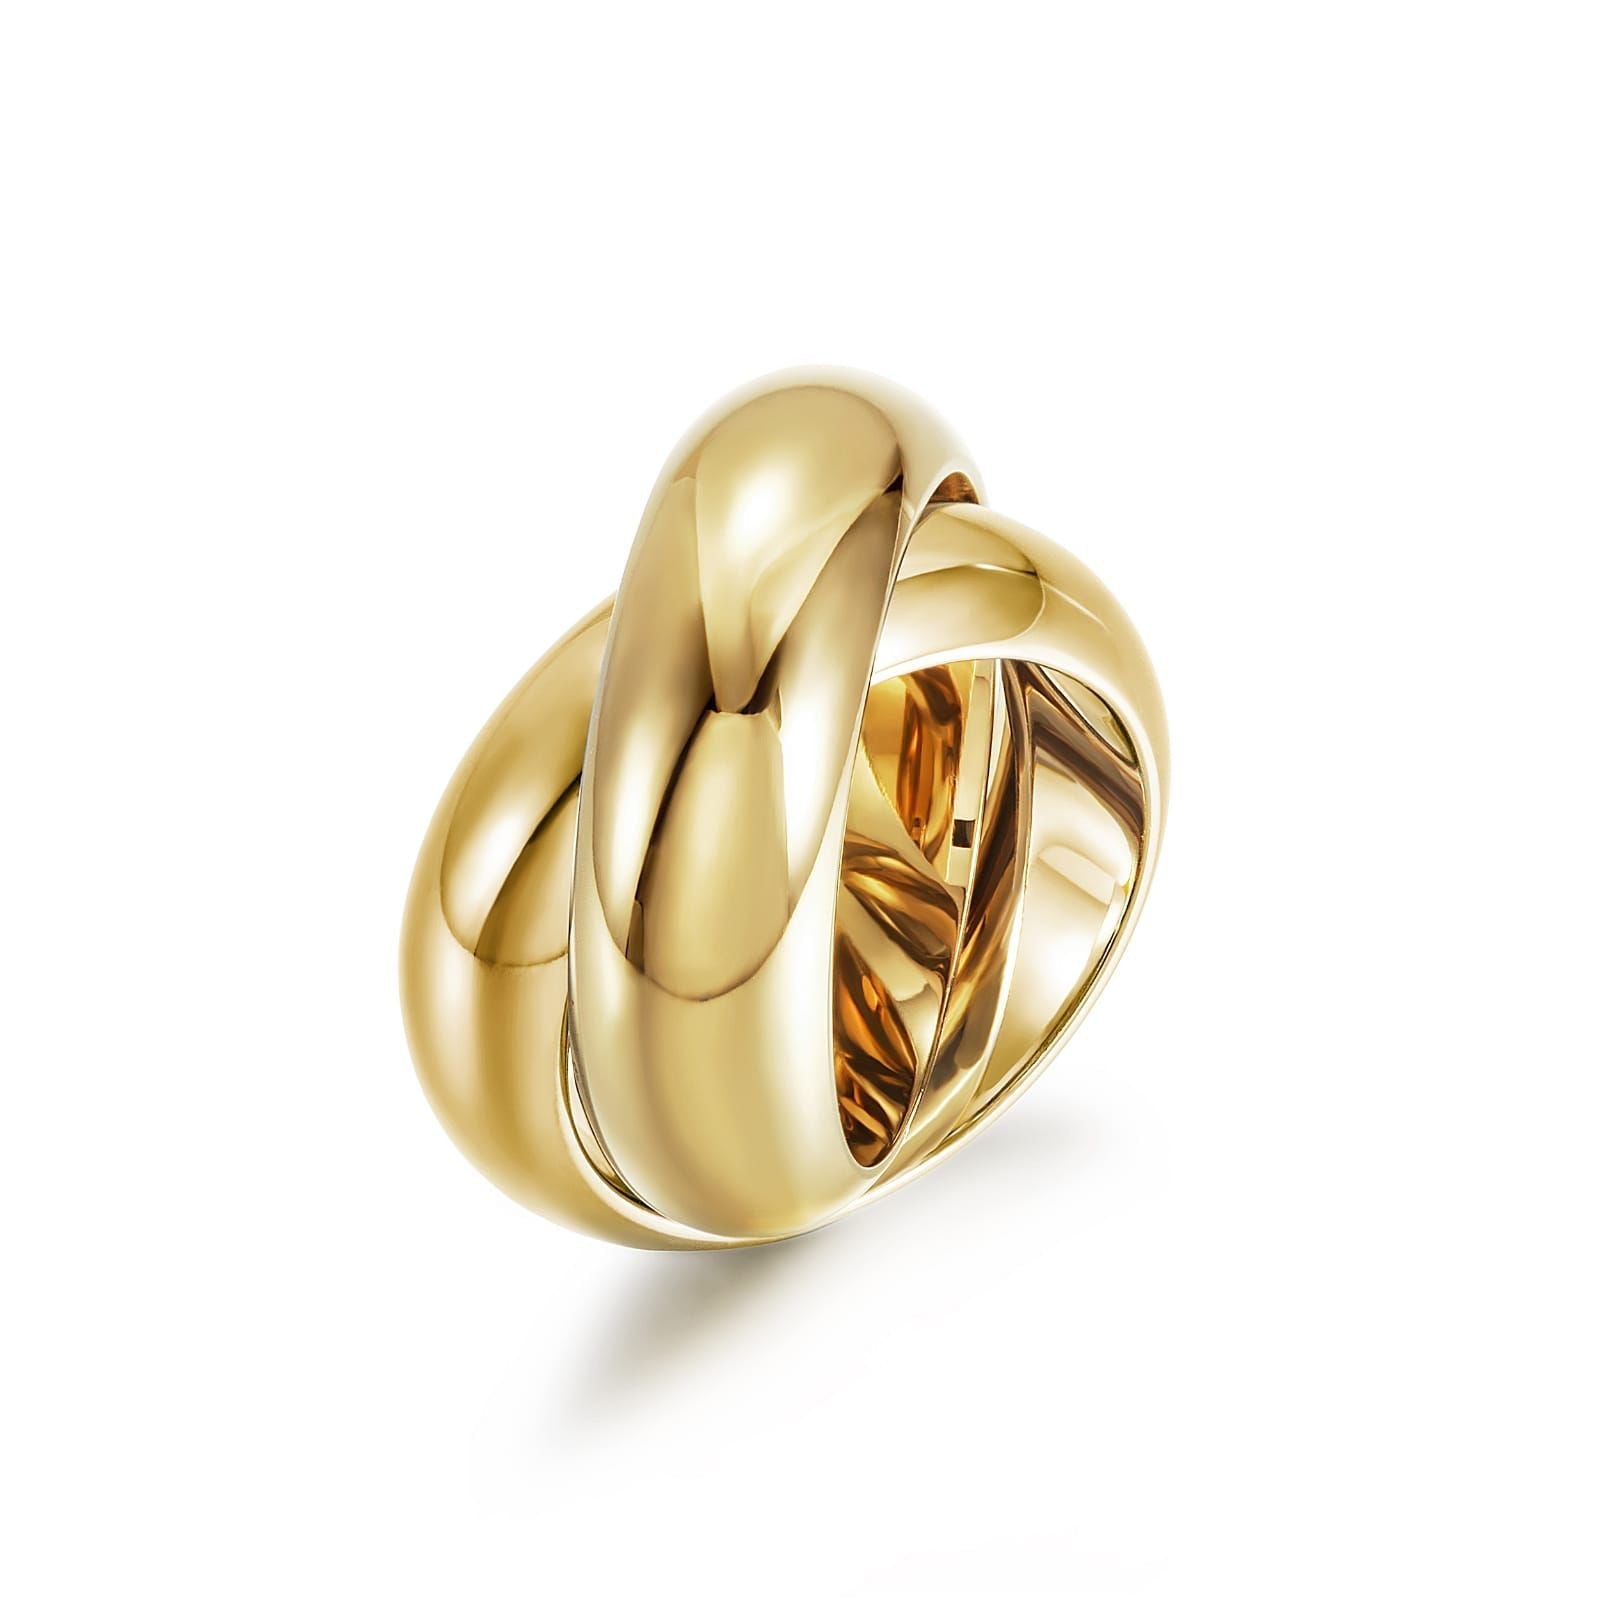 The Love Knot Gold